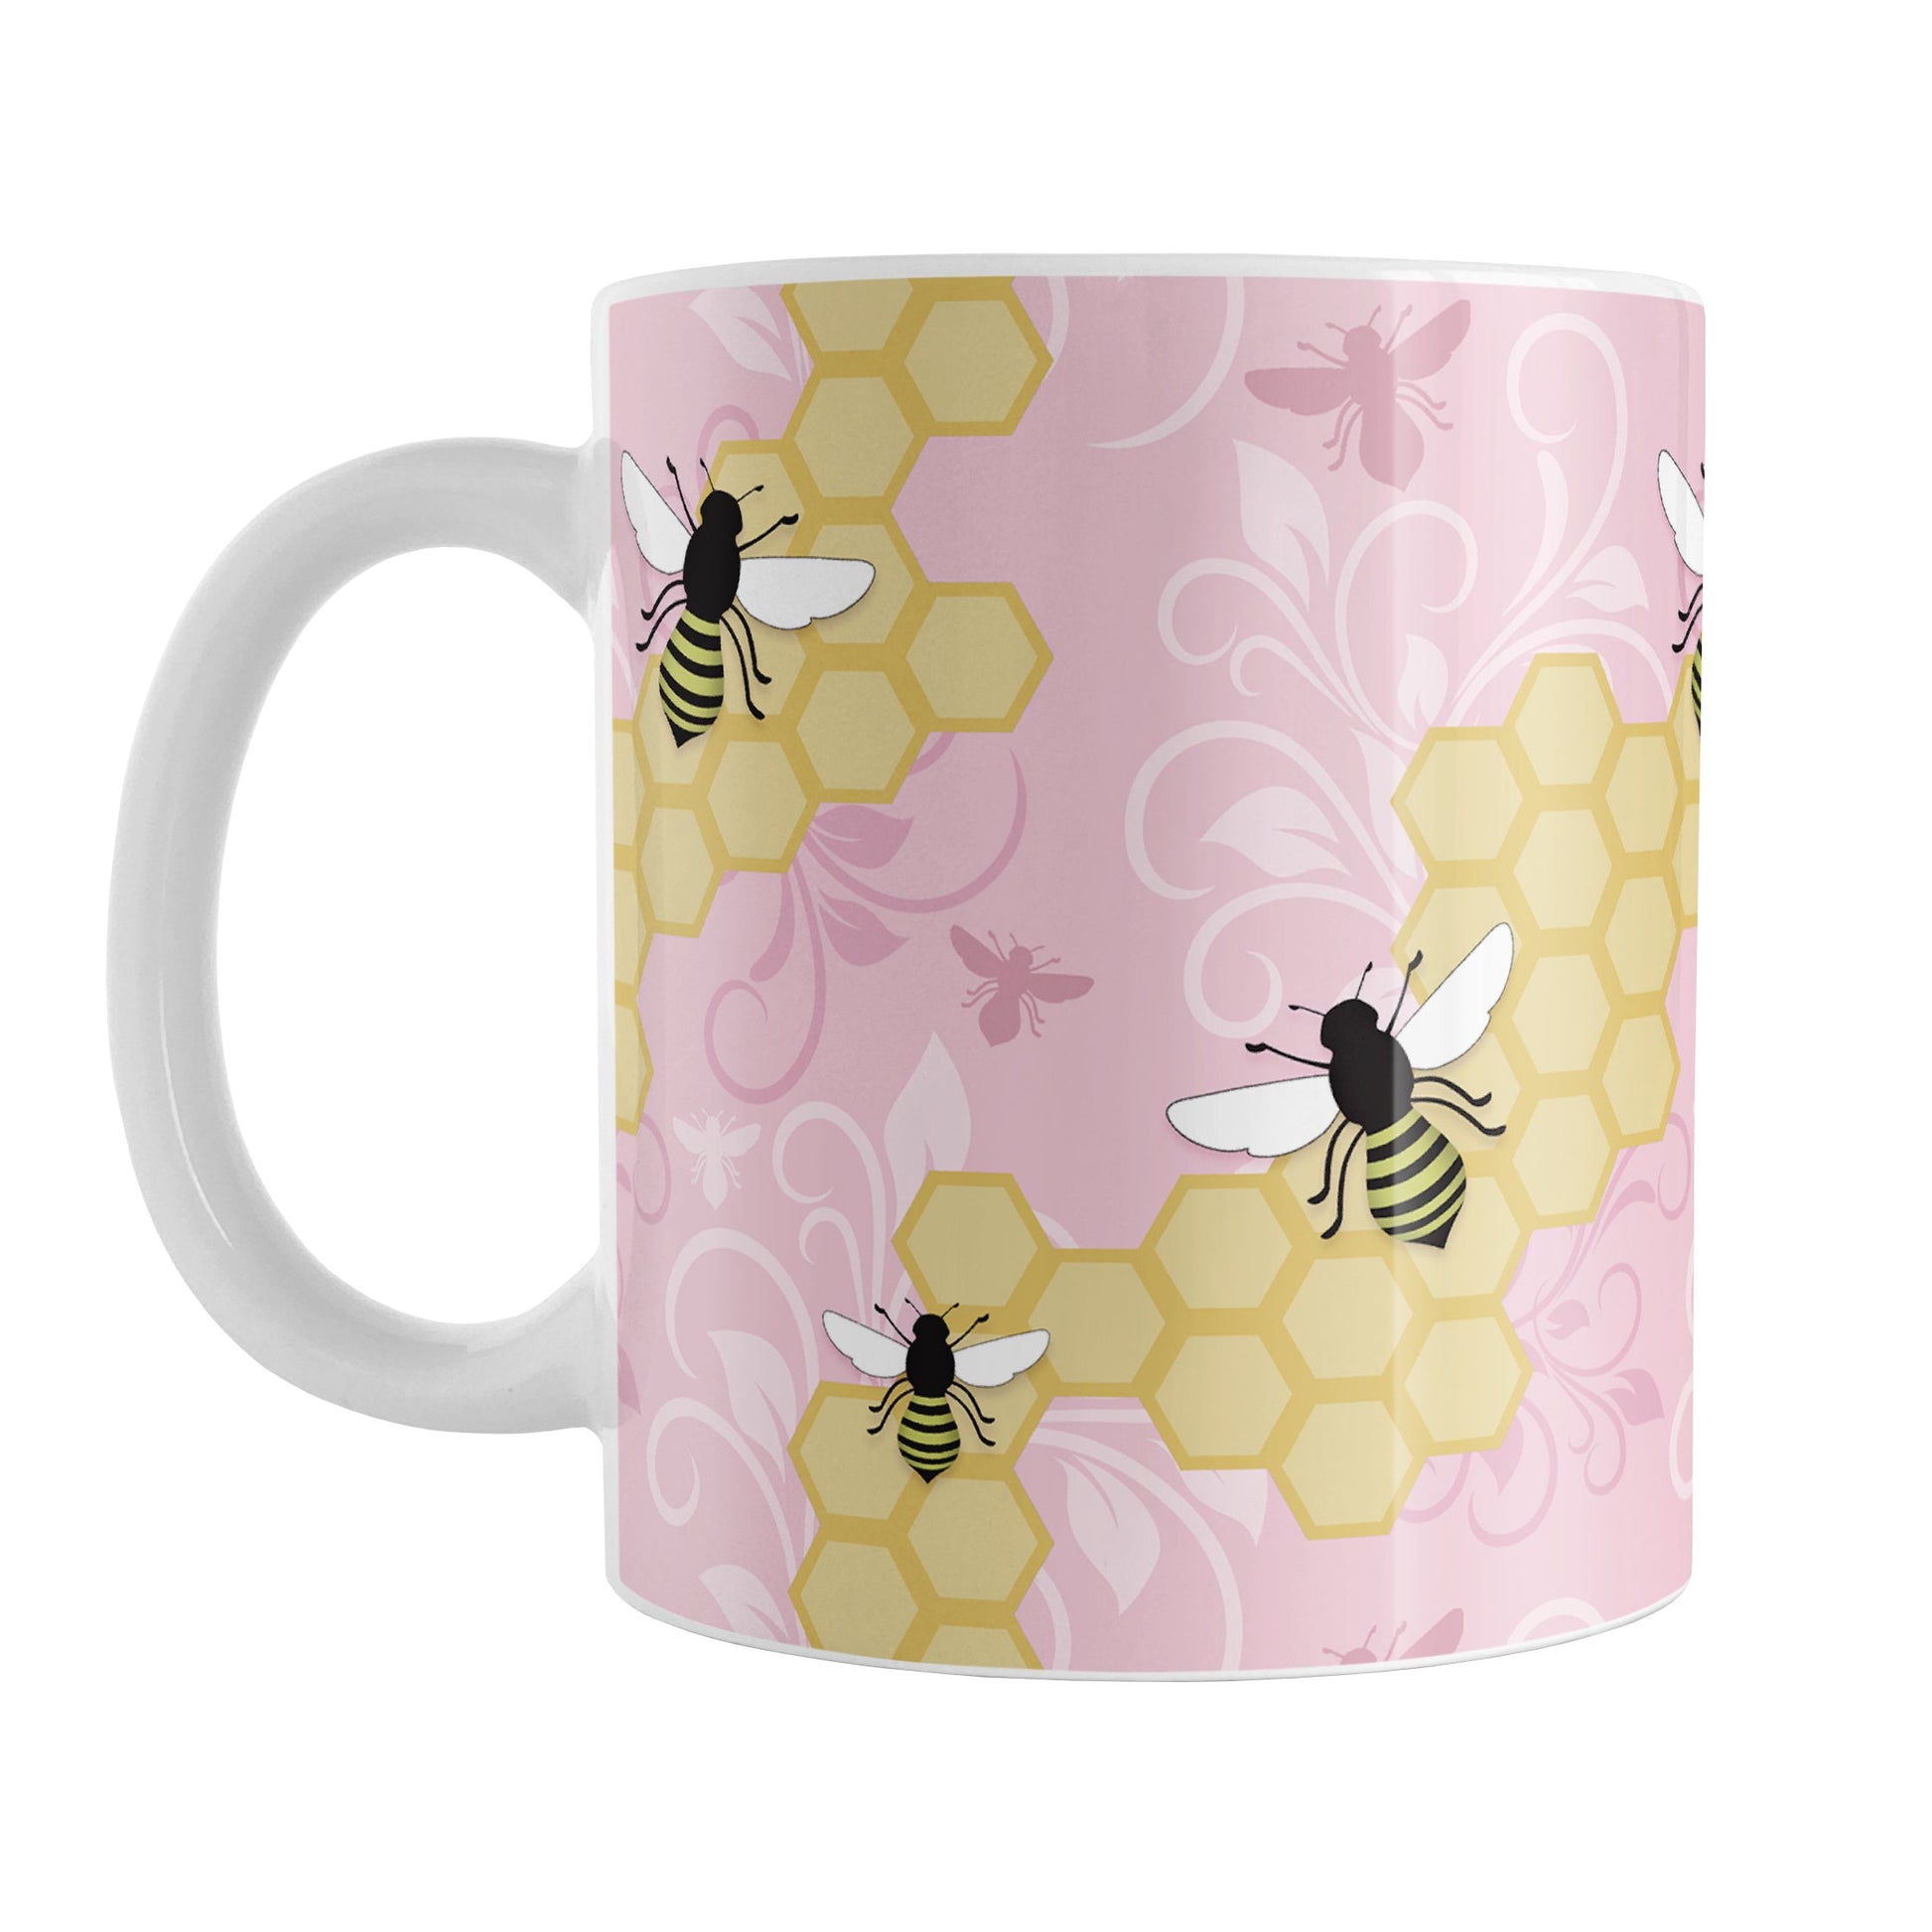 Pink Honeycomb Bee Mug (11oz) at Amy's Coffee Mugs. A ceramic coffee mug designed with a pattern of black and yellow bees on honeycomb lines over a pink flourish background that wraps around the mug to the handle.